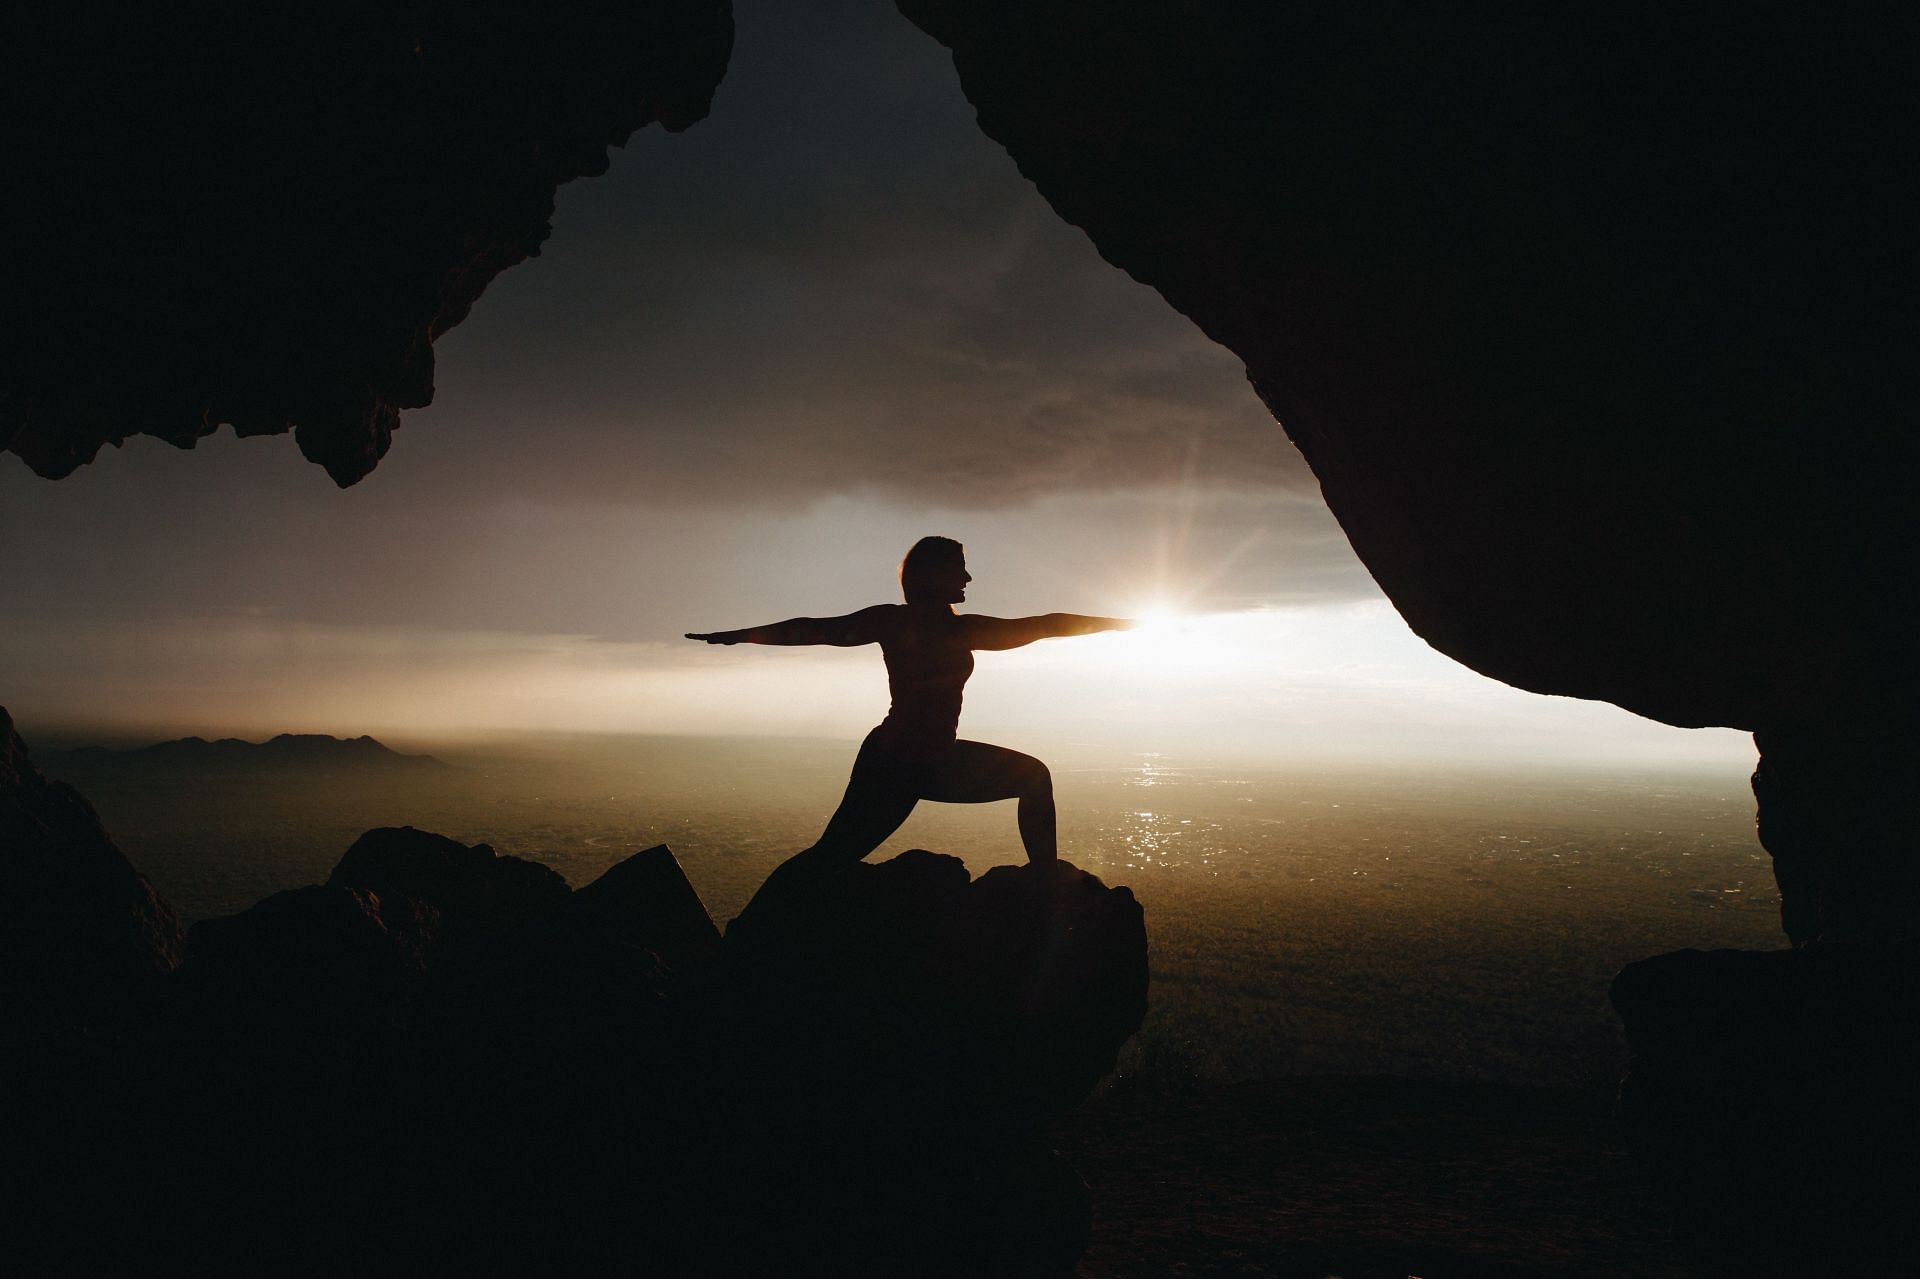 Daily yoga practice can help boost your immune system. (Image via Unsplash / Dave Contreras)